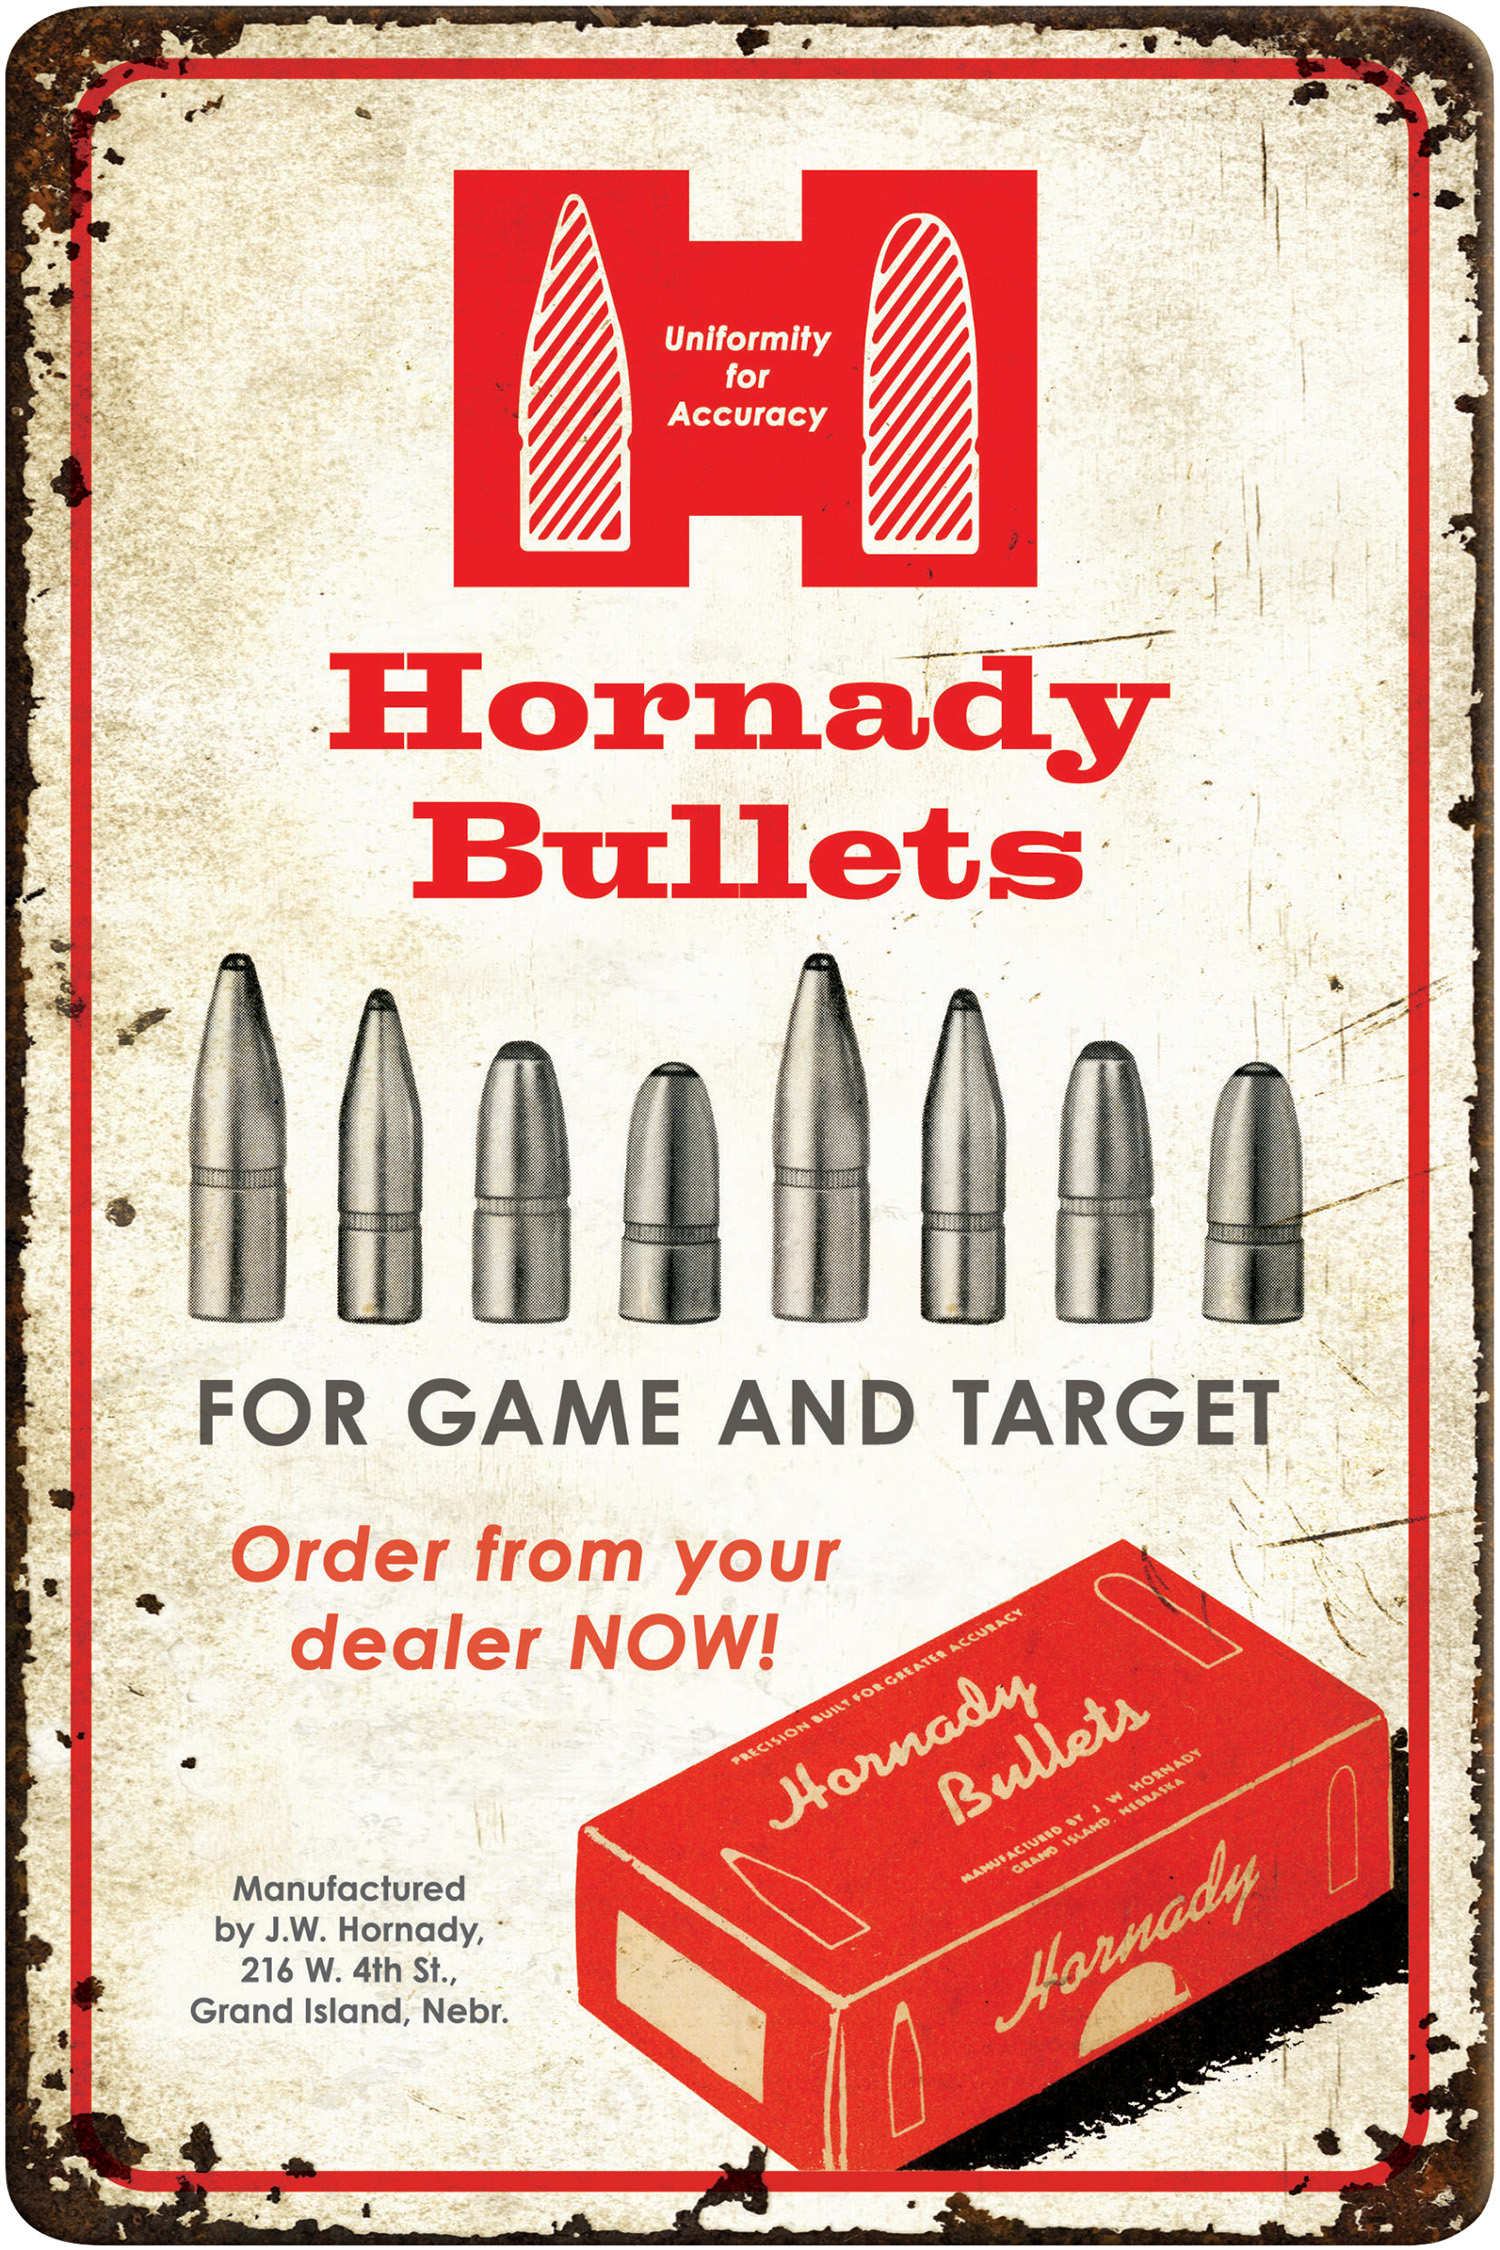 Hornady 99145 Bullets Tin Sign Rustic Red/White Aluminum 12